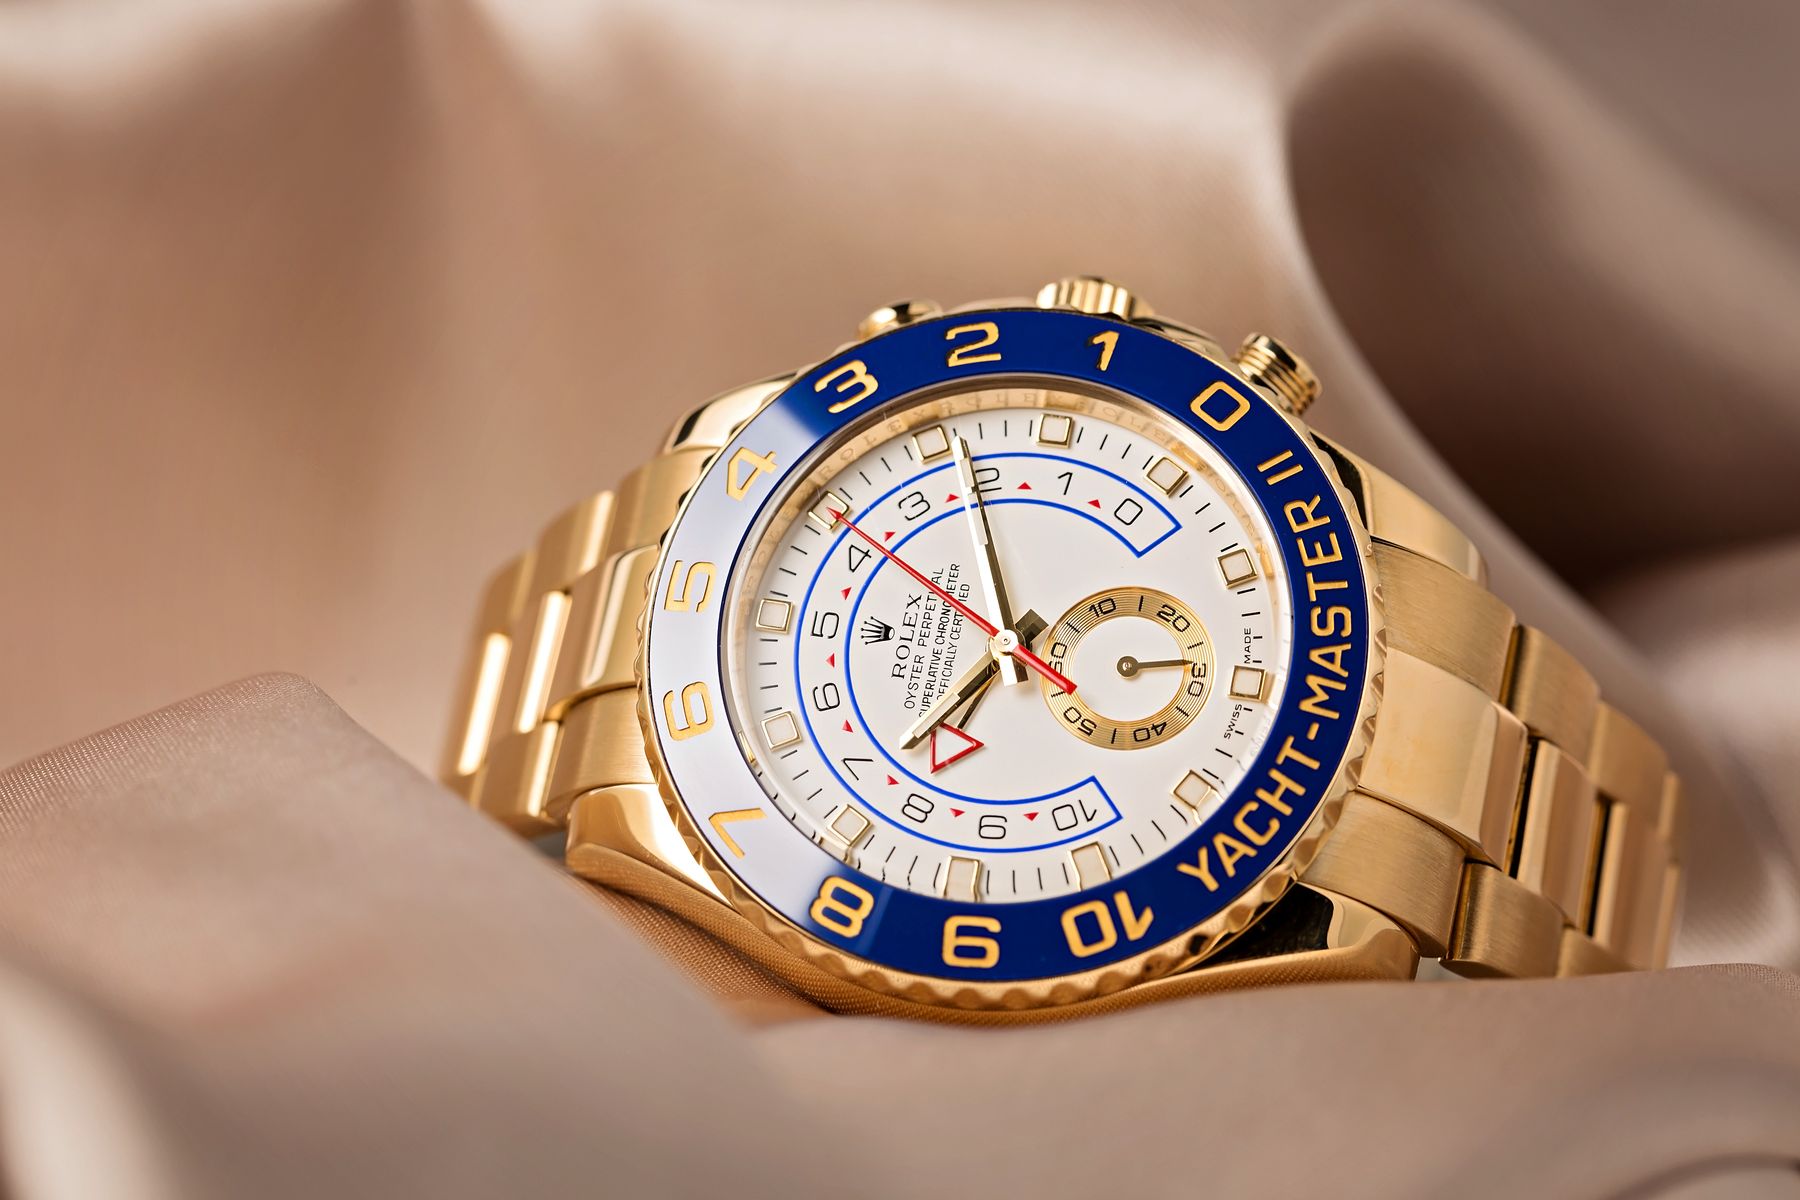 Rolex Trade-in Yellow Gold Yacht-Master II 116688